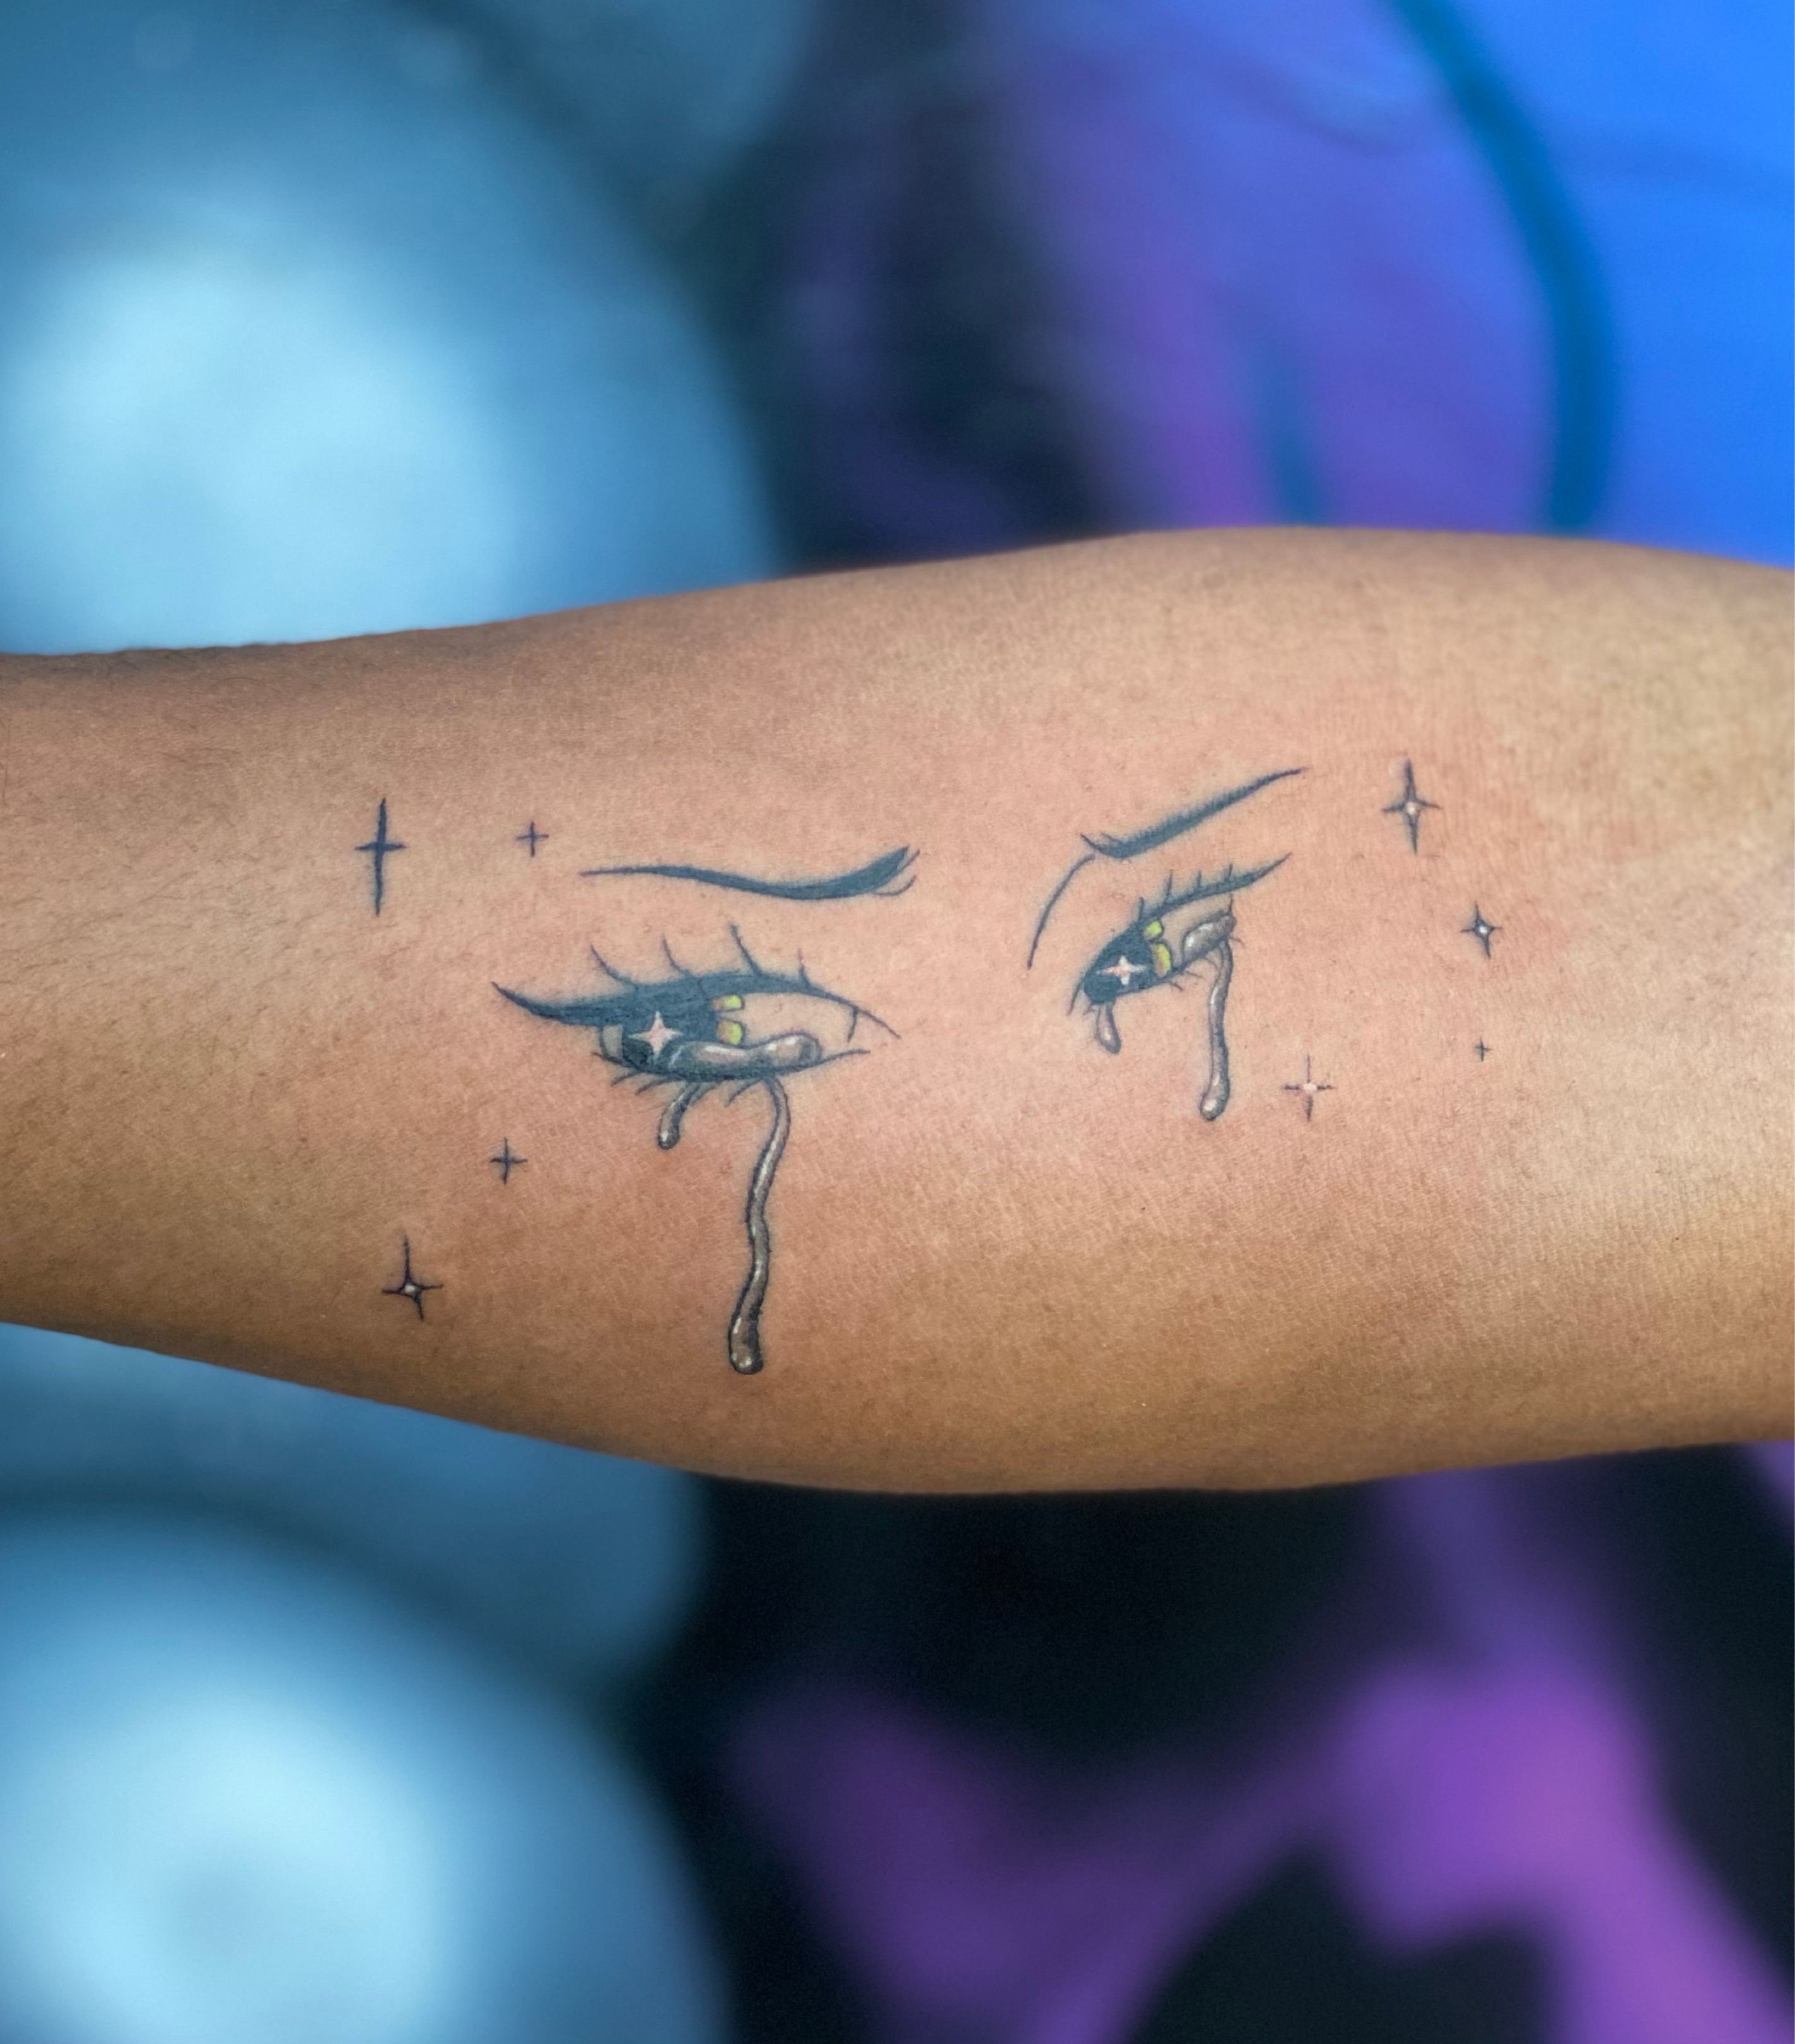 Anime Tattoos: All You've Ever Wanted To Know | CUSTOM TATTOO DESIGN